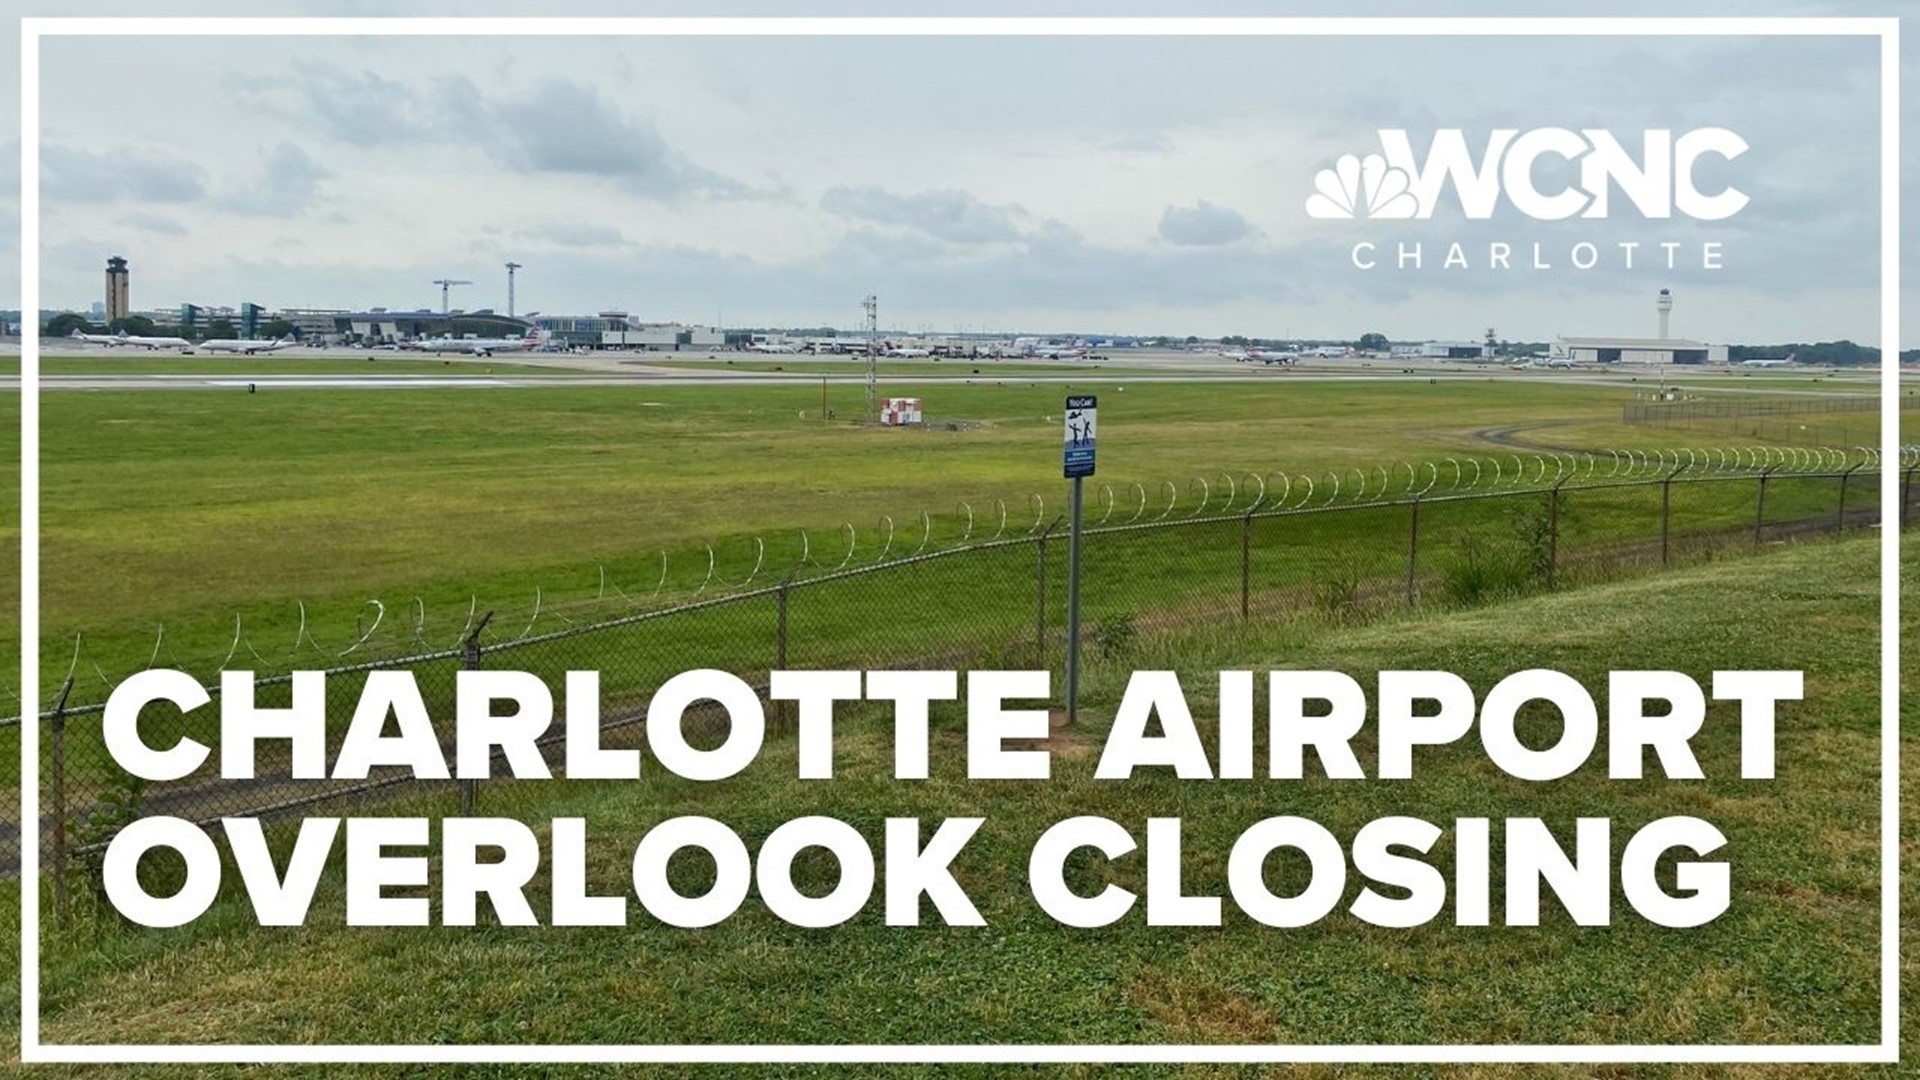 Charlotte Douglas is one of a few airports to provide a free front-row seat to all takeoffs and landings. But it will be moving soon to make room for a new runway.